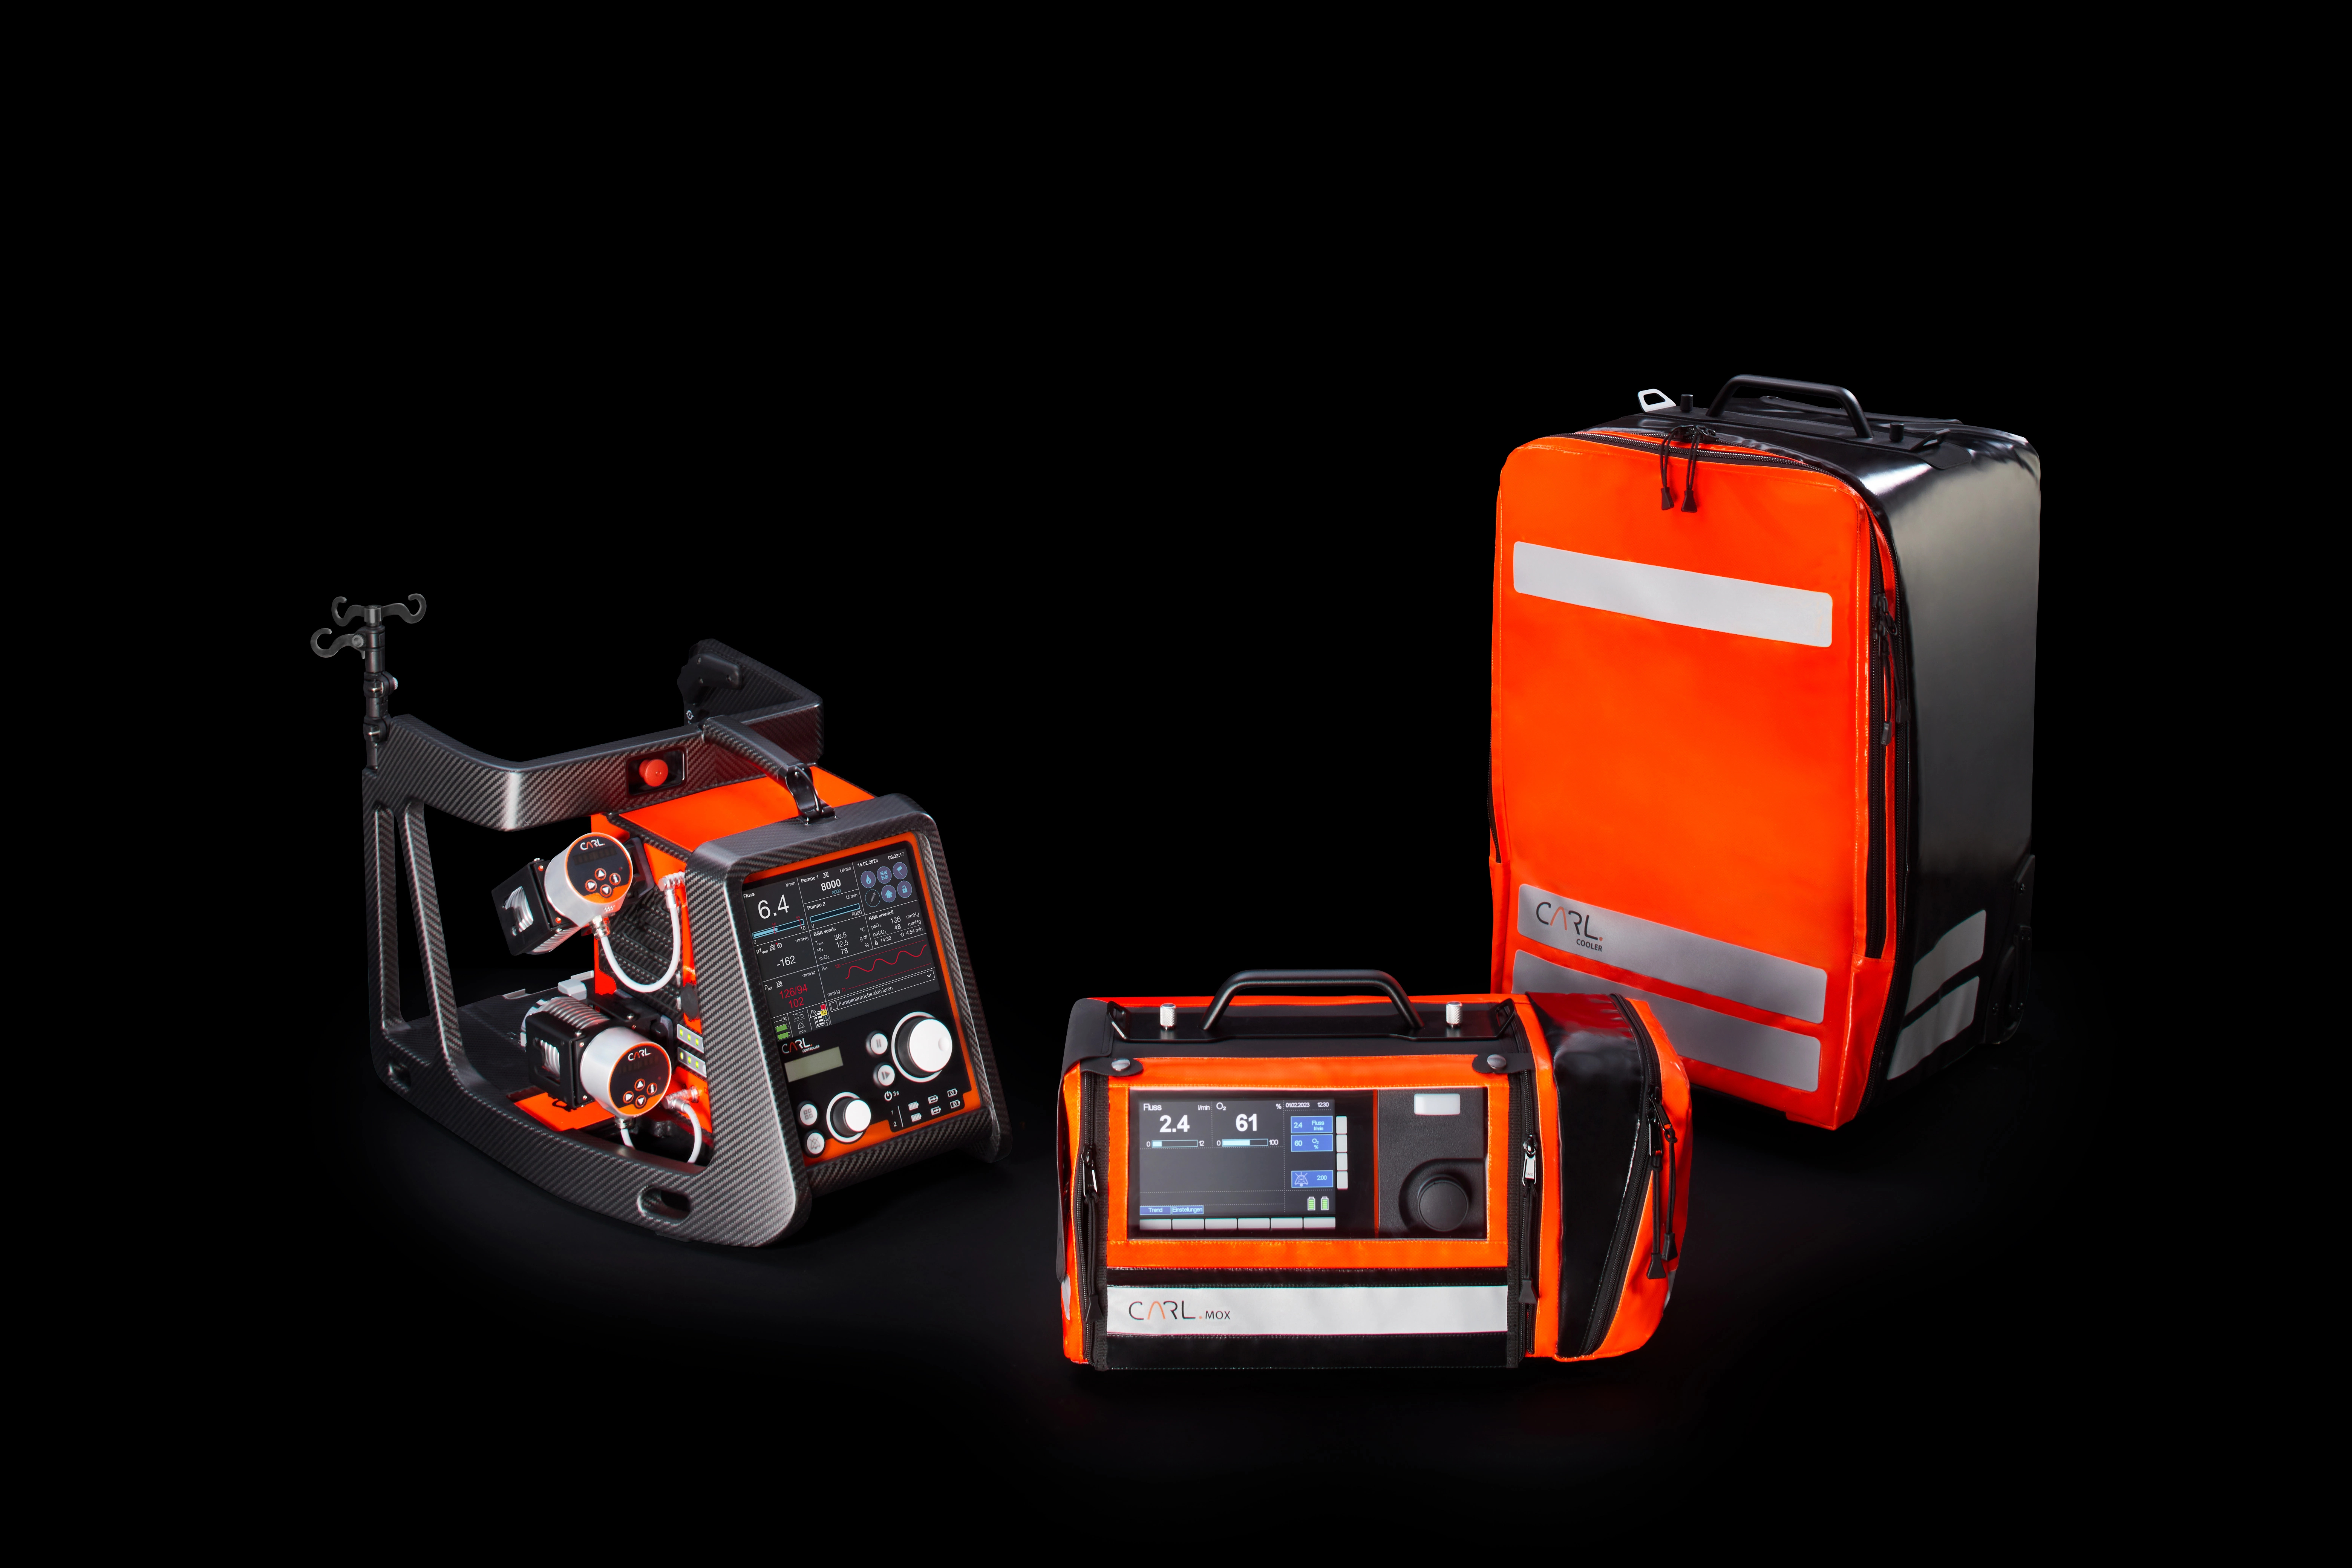 Three compact, portable devices in a black and orange design can be seen against a black background.